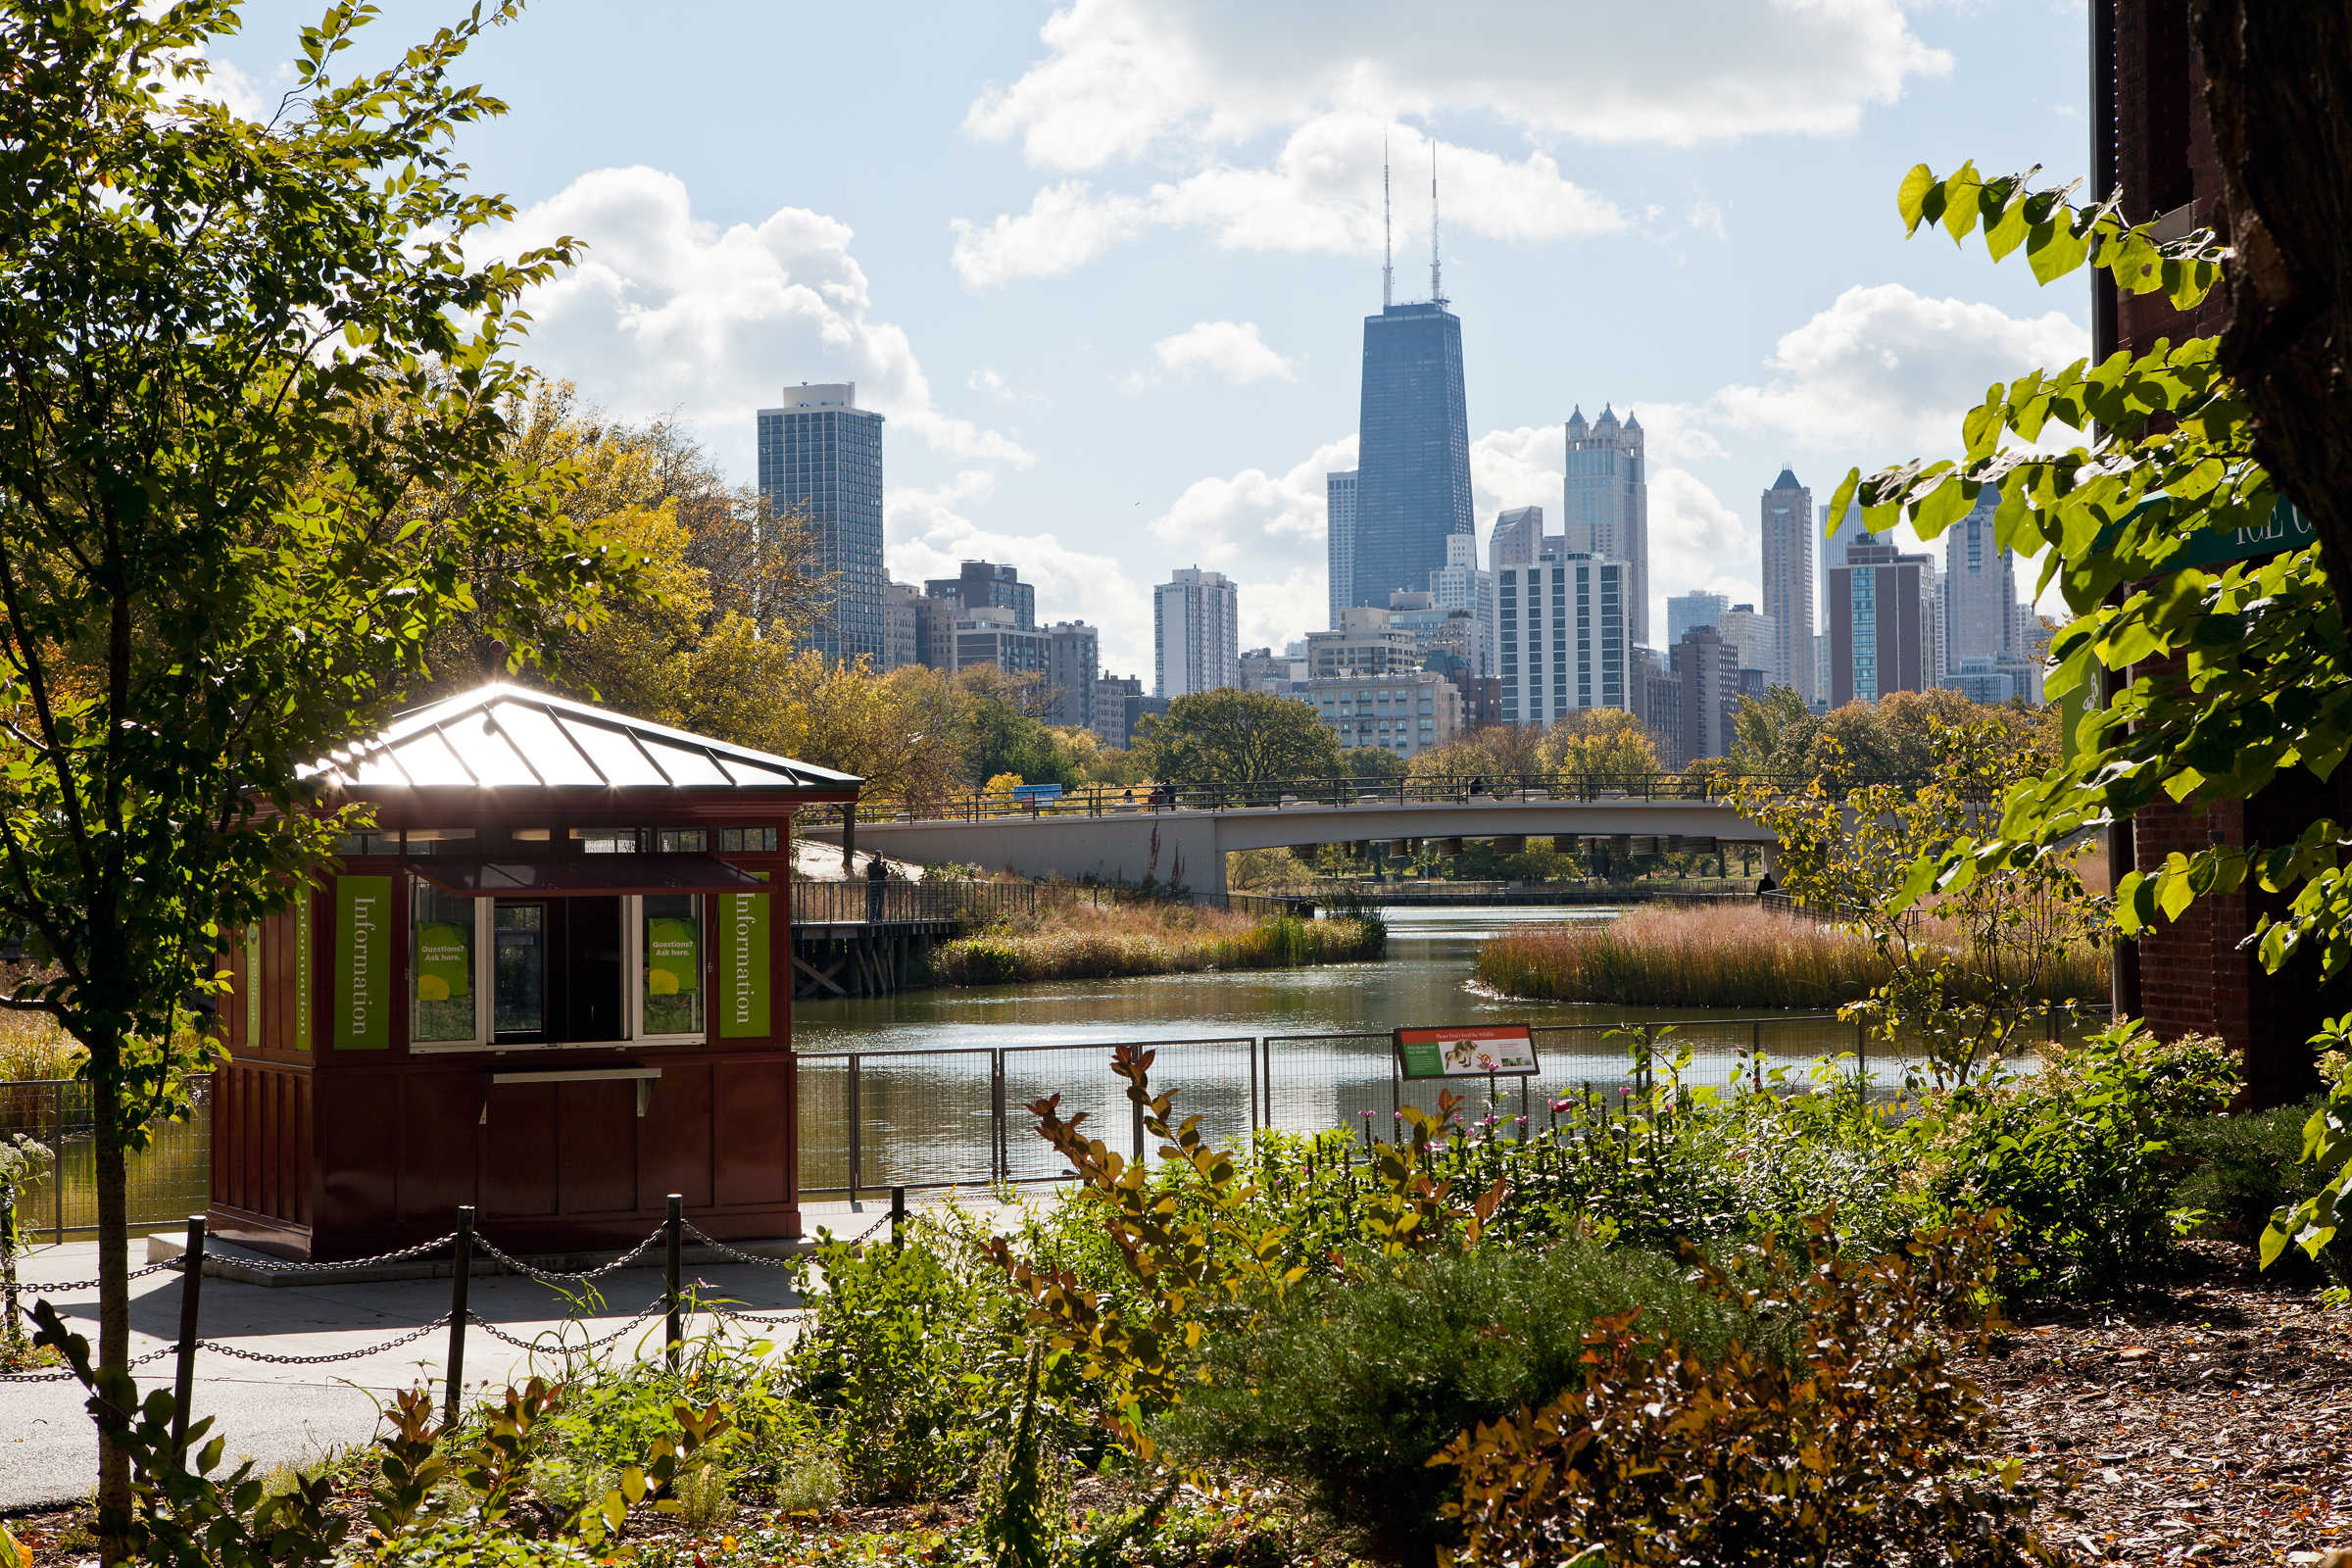 Nature Boardwalk at Lincoln Park Zoo a haven for native wildlife